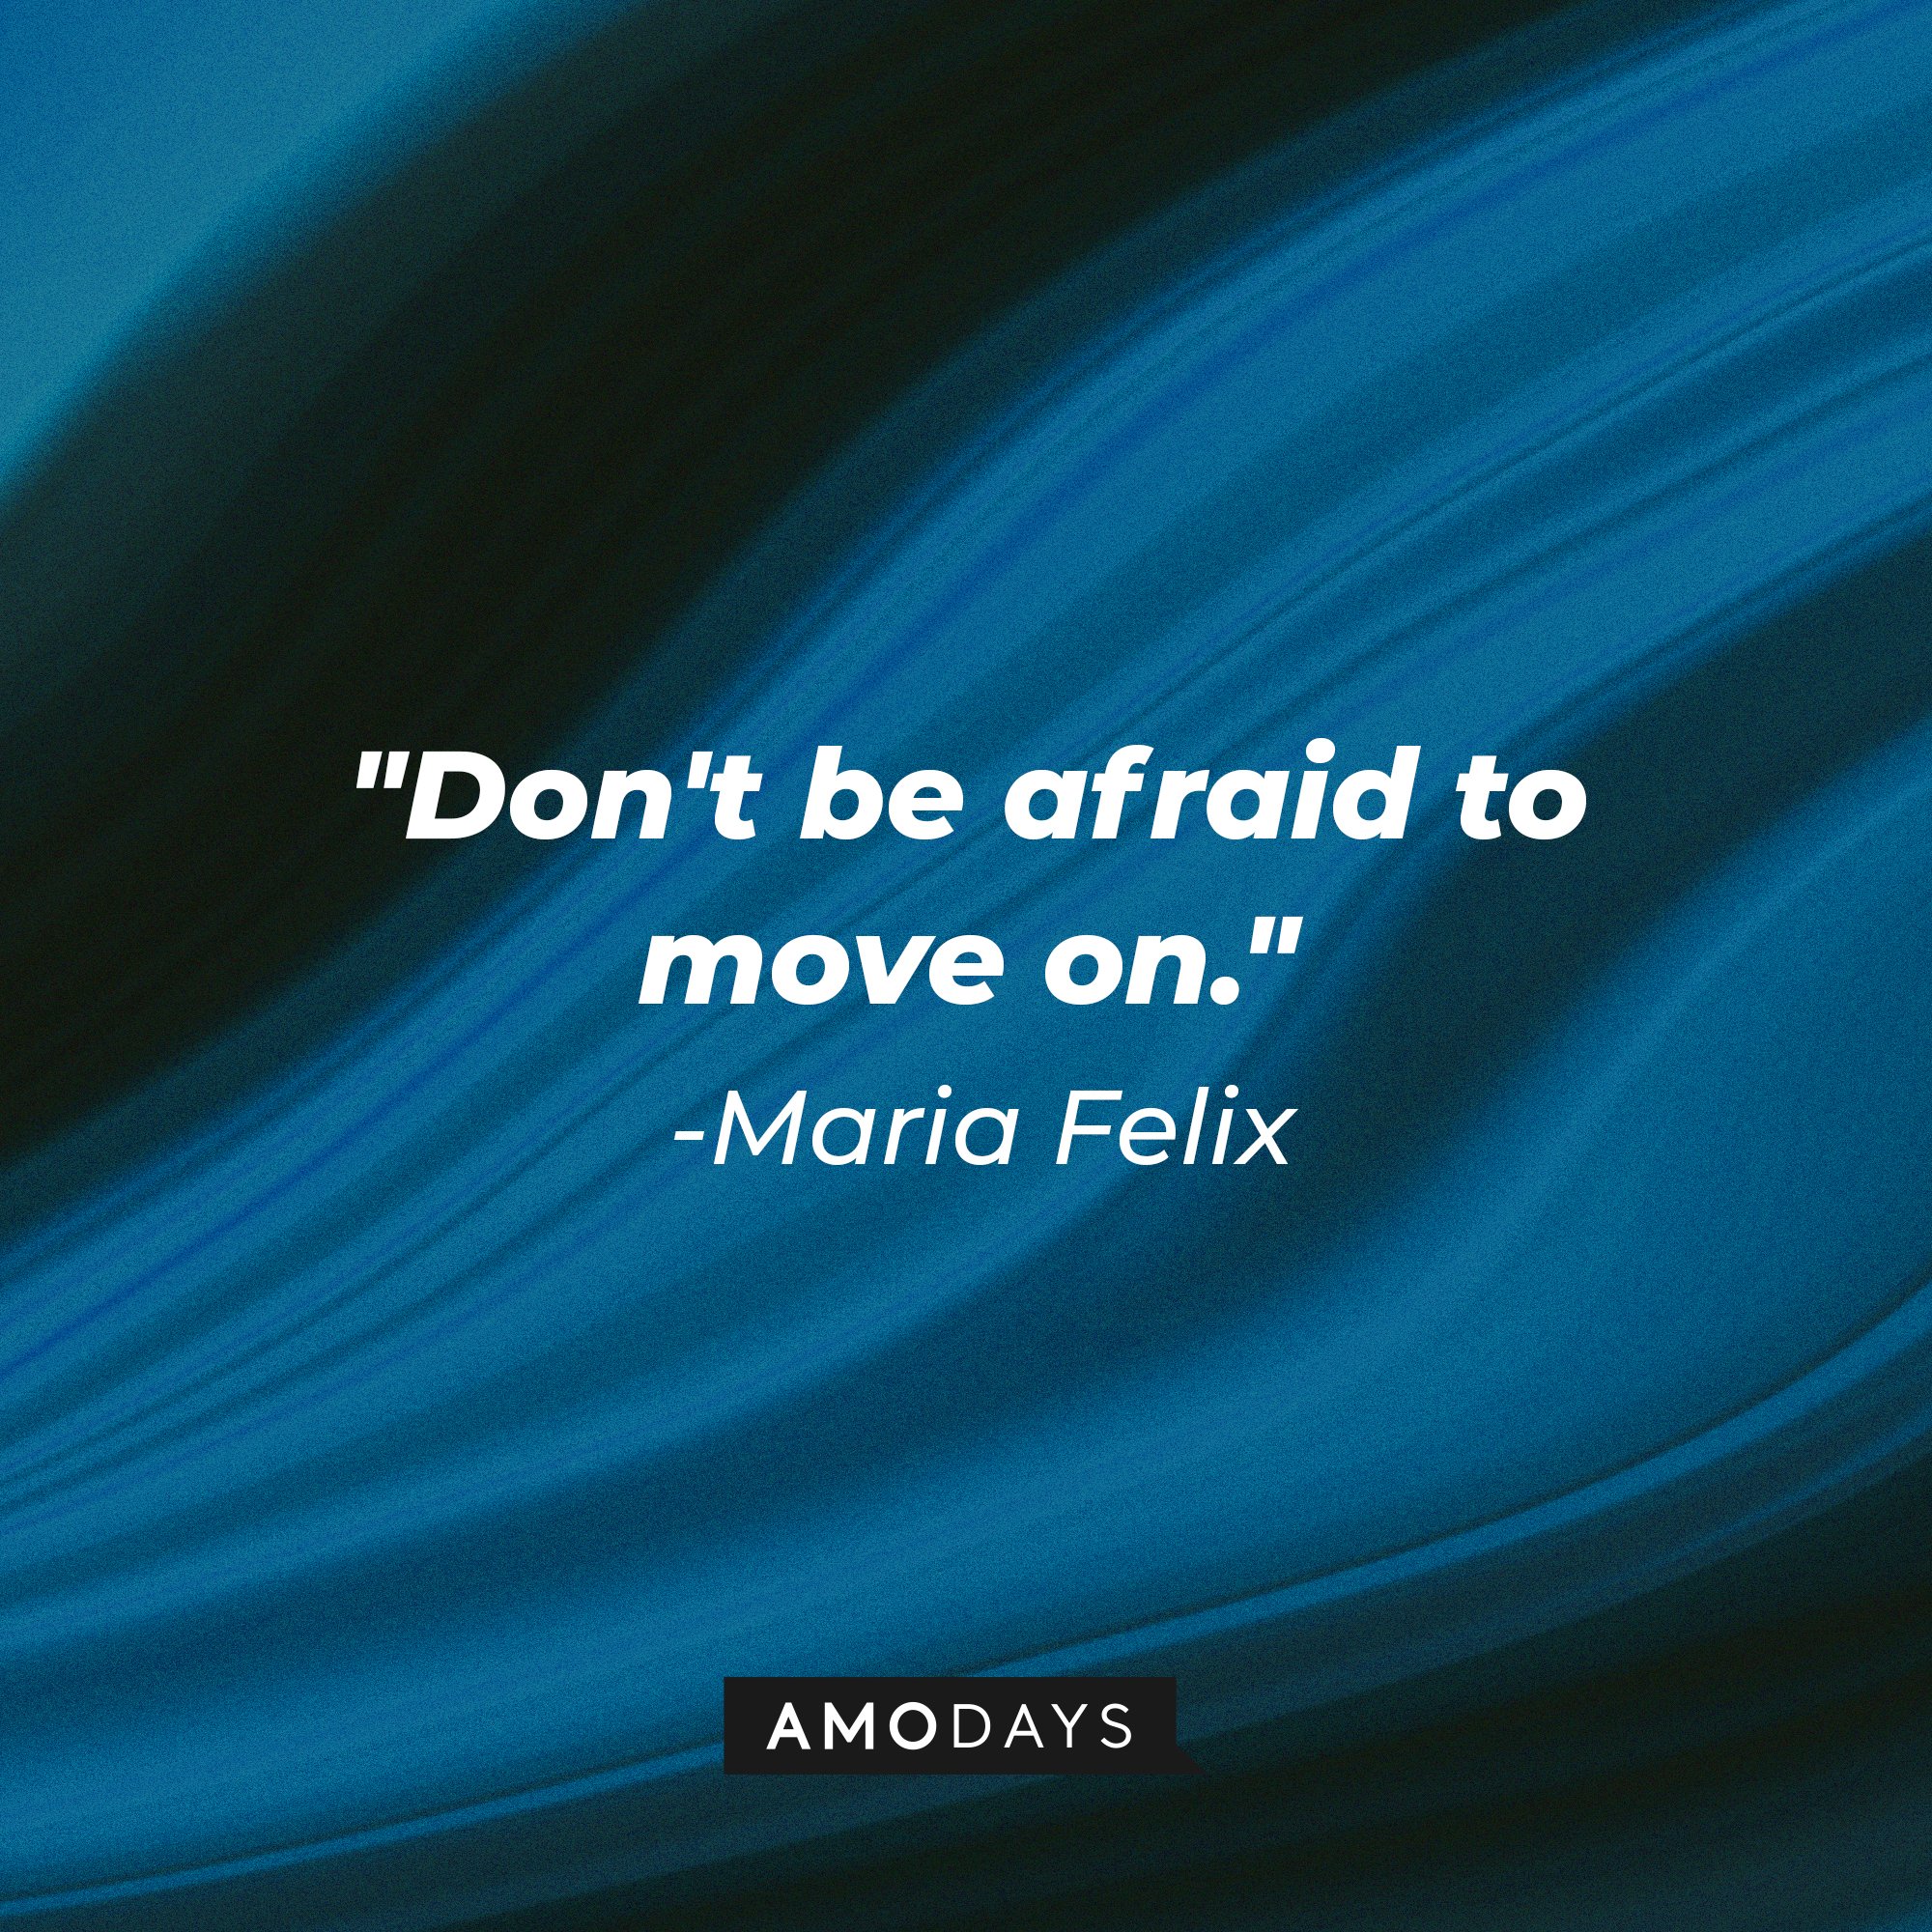 Maria Felix's quote: "Don't be afraid to move on." | Image: AmoDays